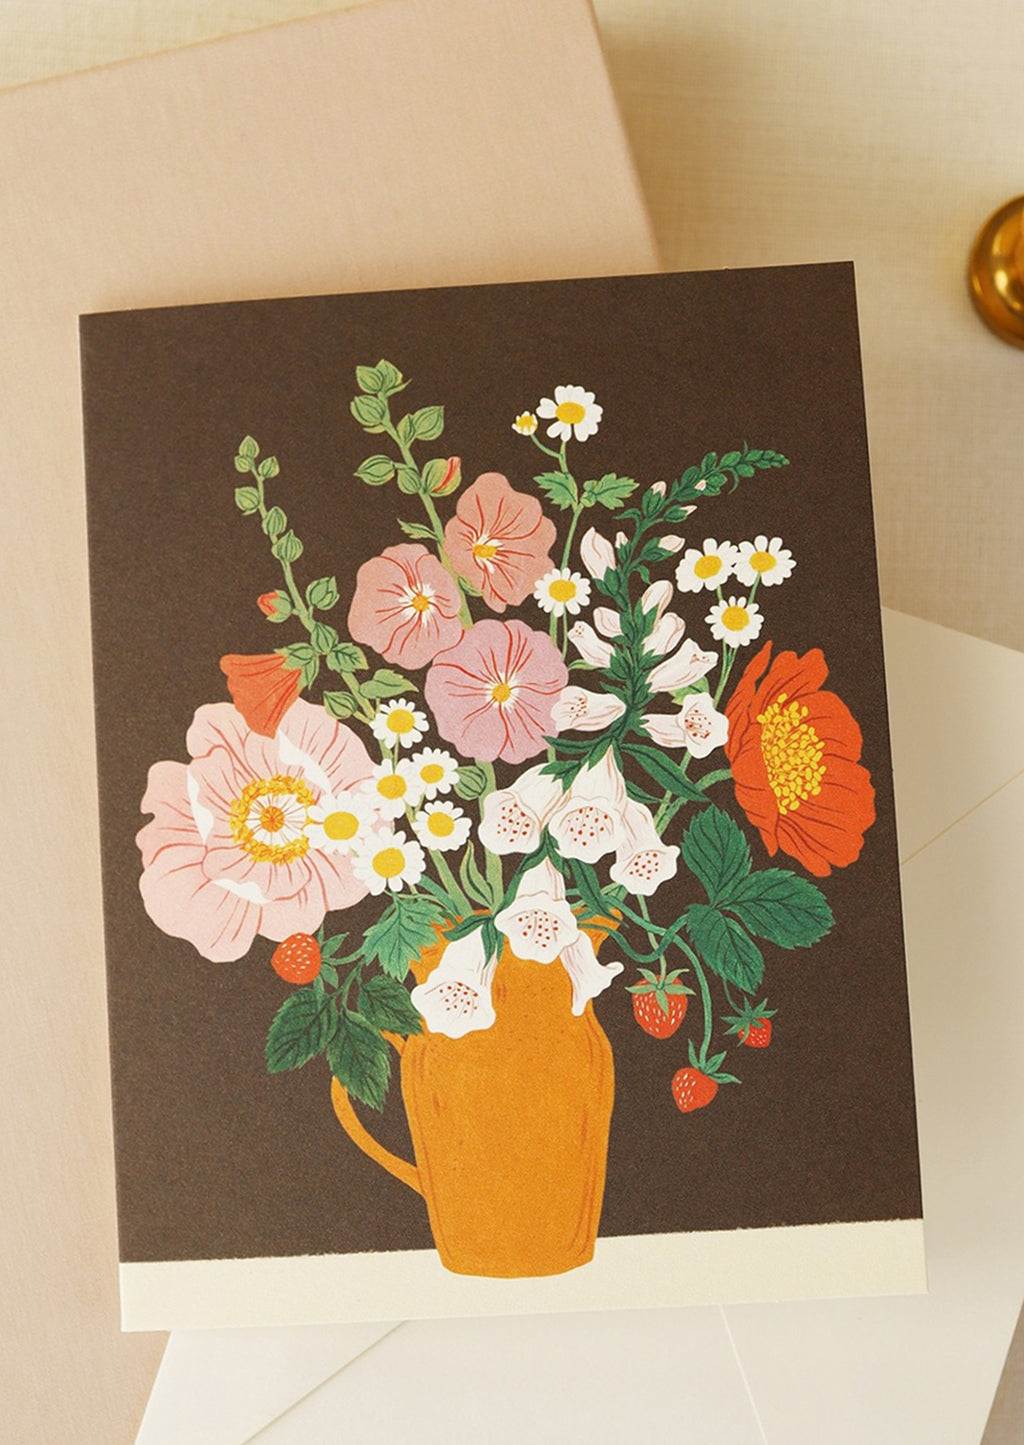 2: A greeting card with floral arrangement on brown background.